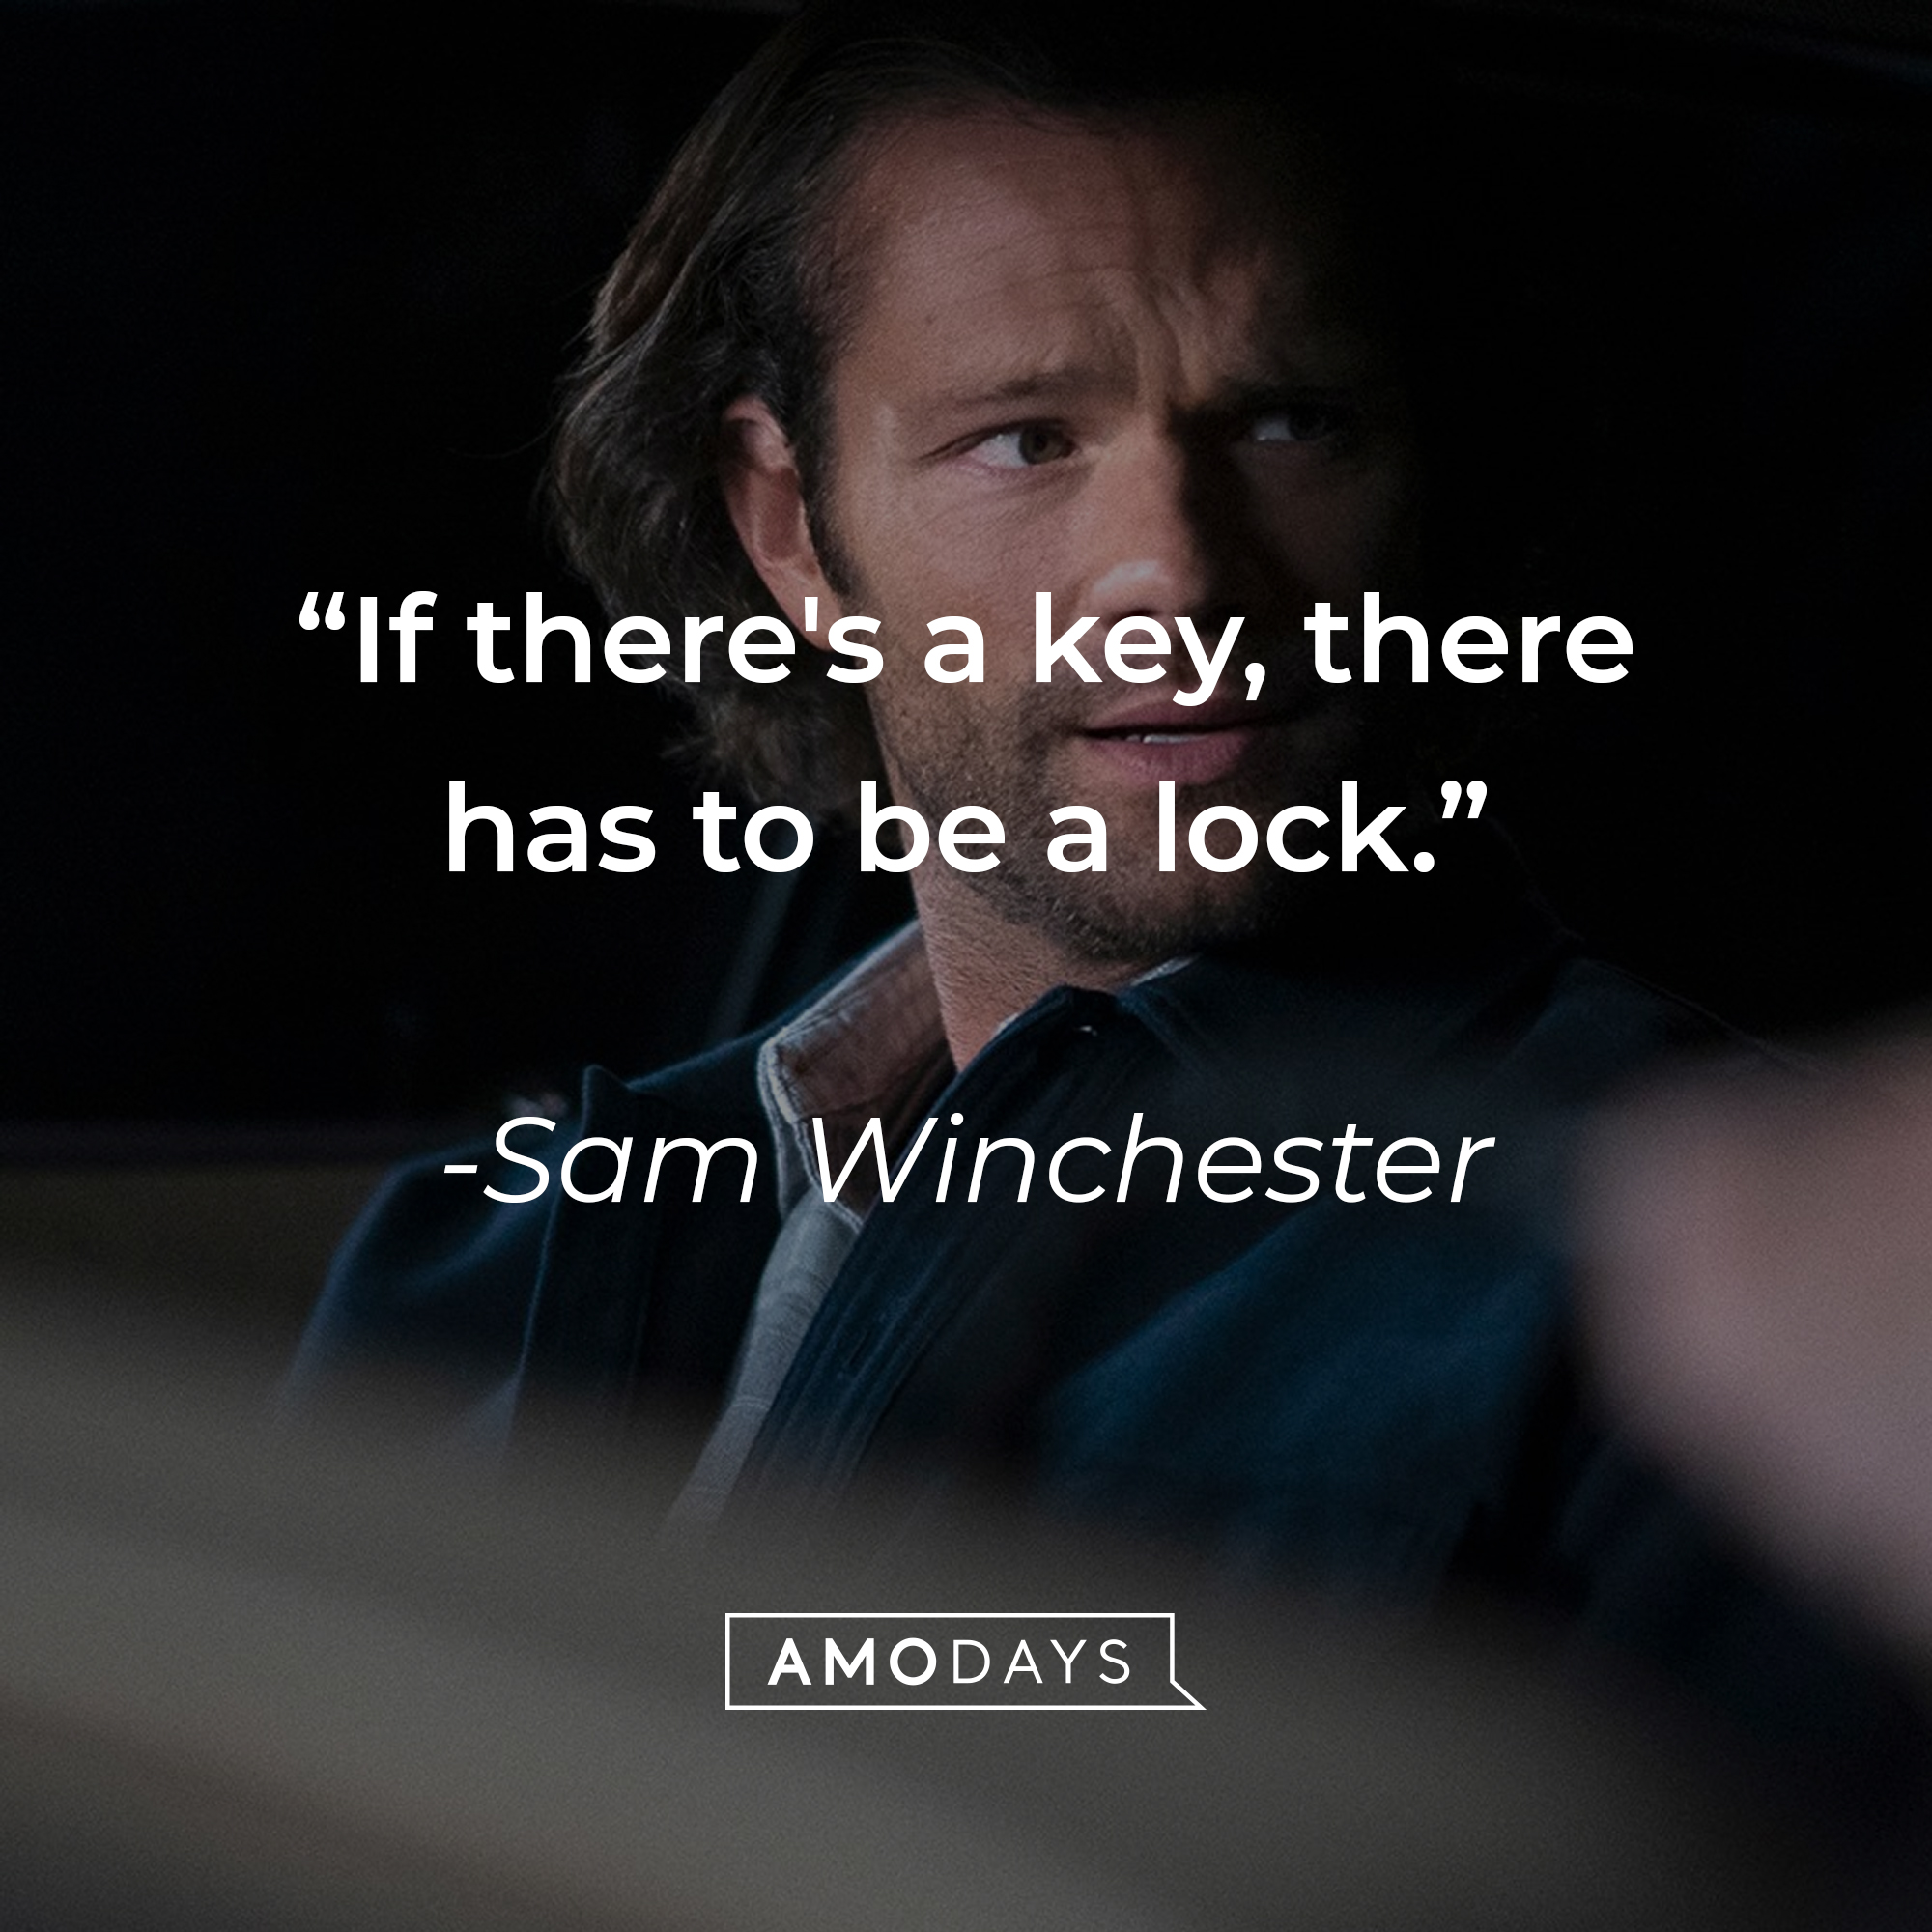 Sam Winchester's quote: "If there's a key, there has to be a lock." | Source: Facebook.com/Supernatural